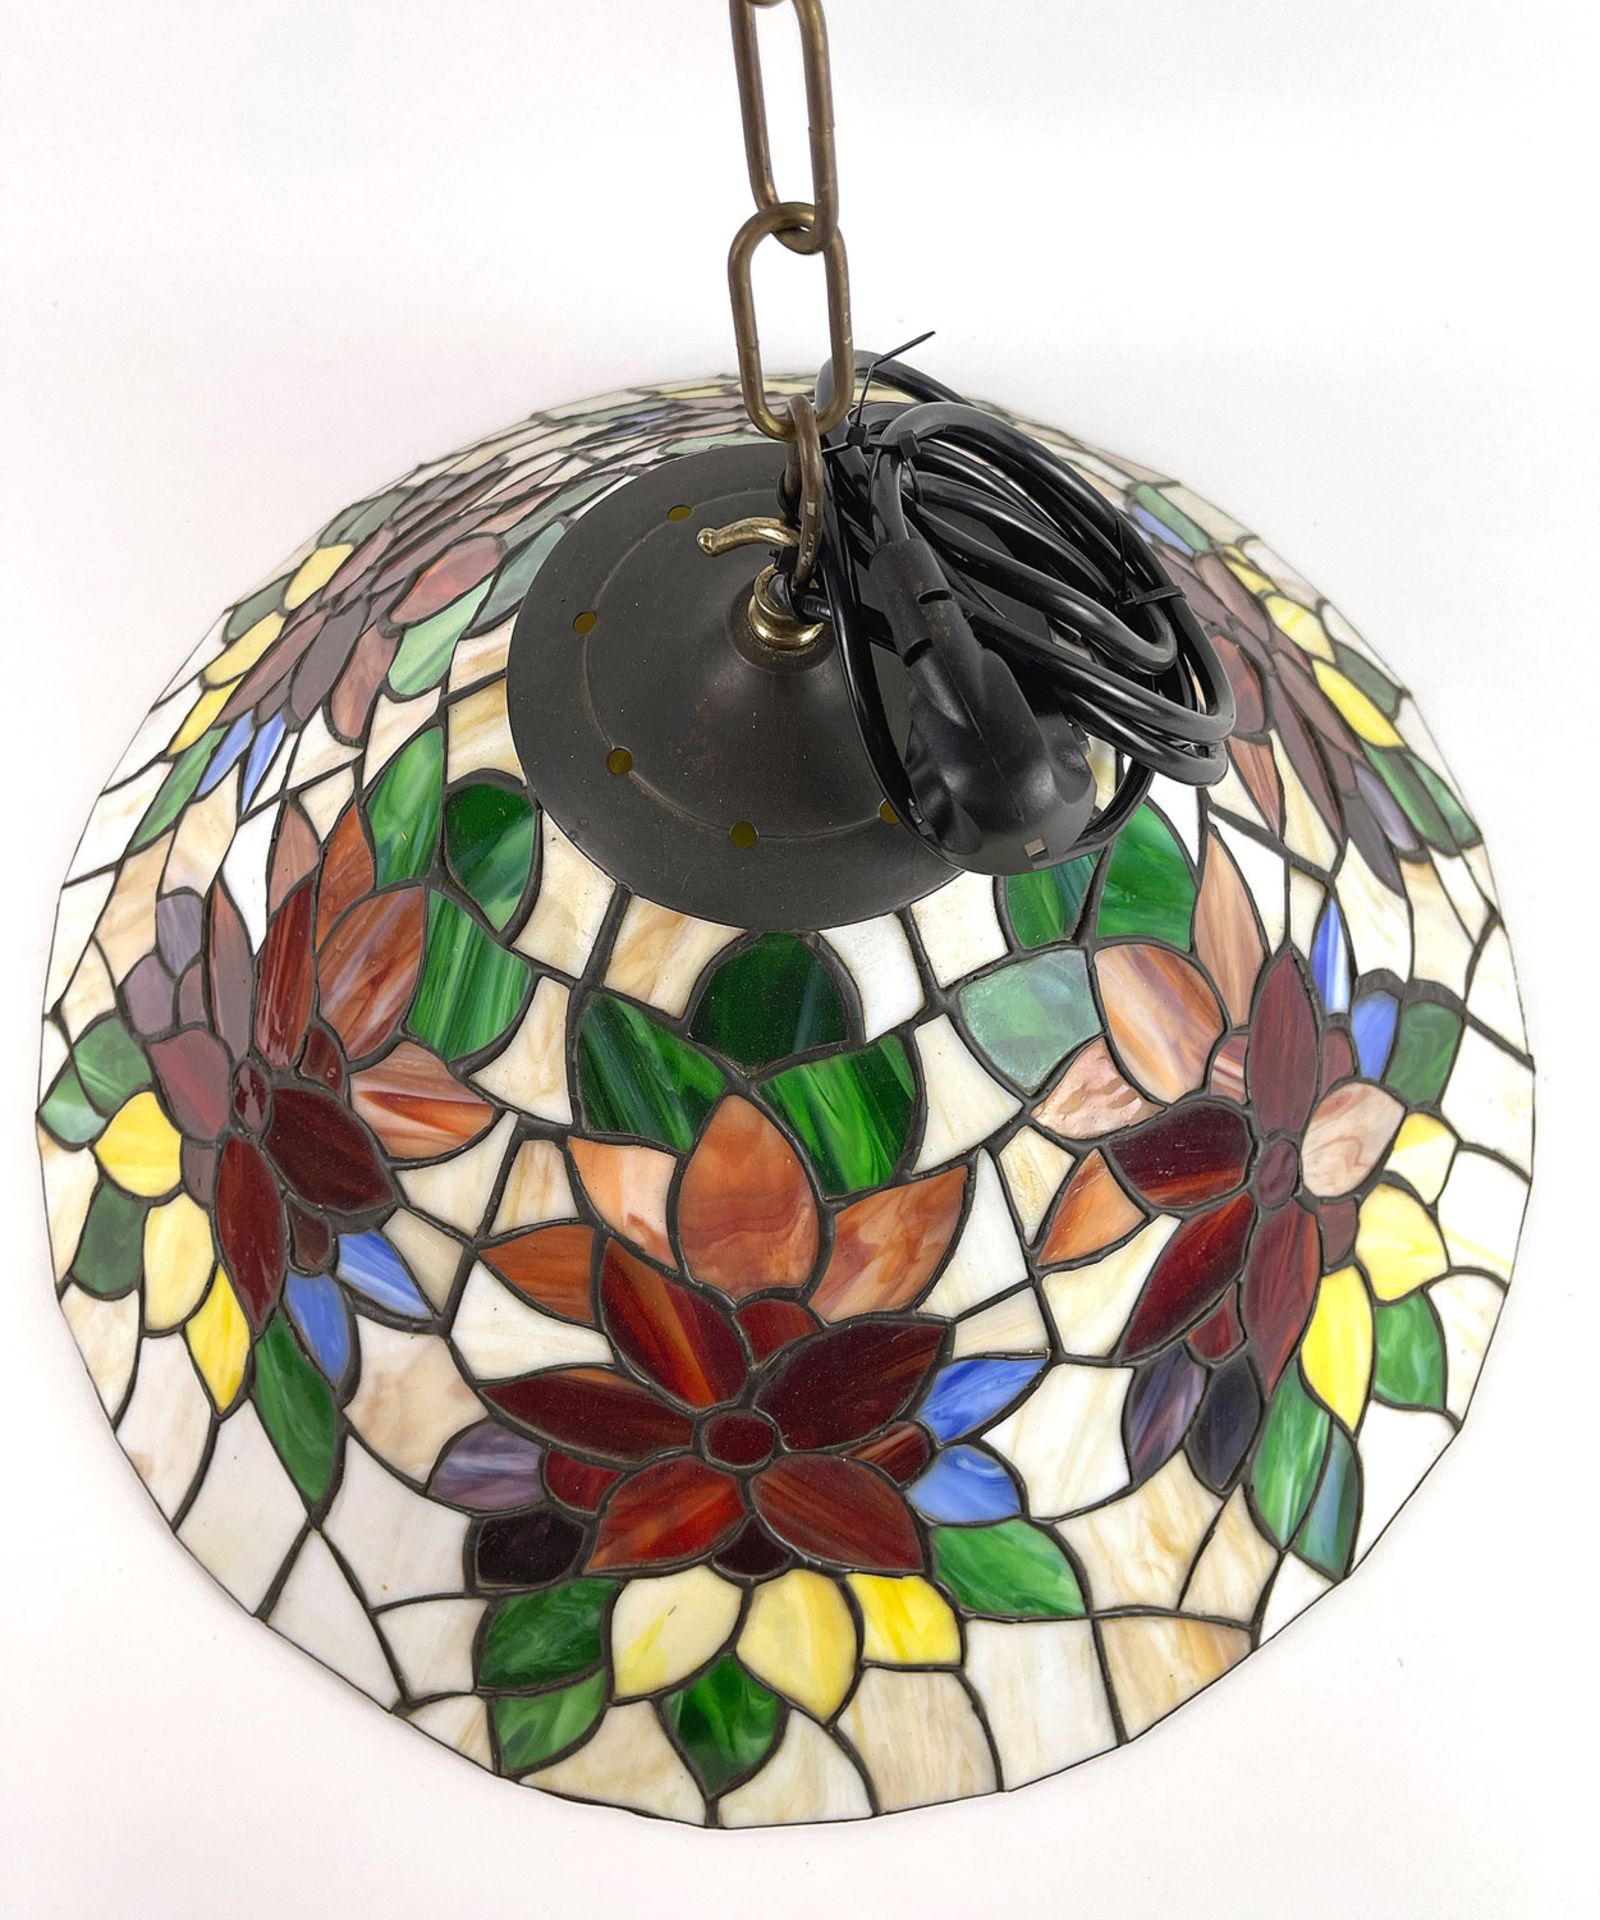 Tiffany Style Hanging Ceiling Lamp with Flower Motif - Bild 3 aus 4